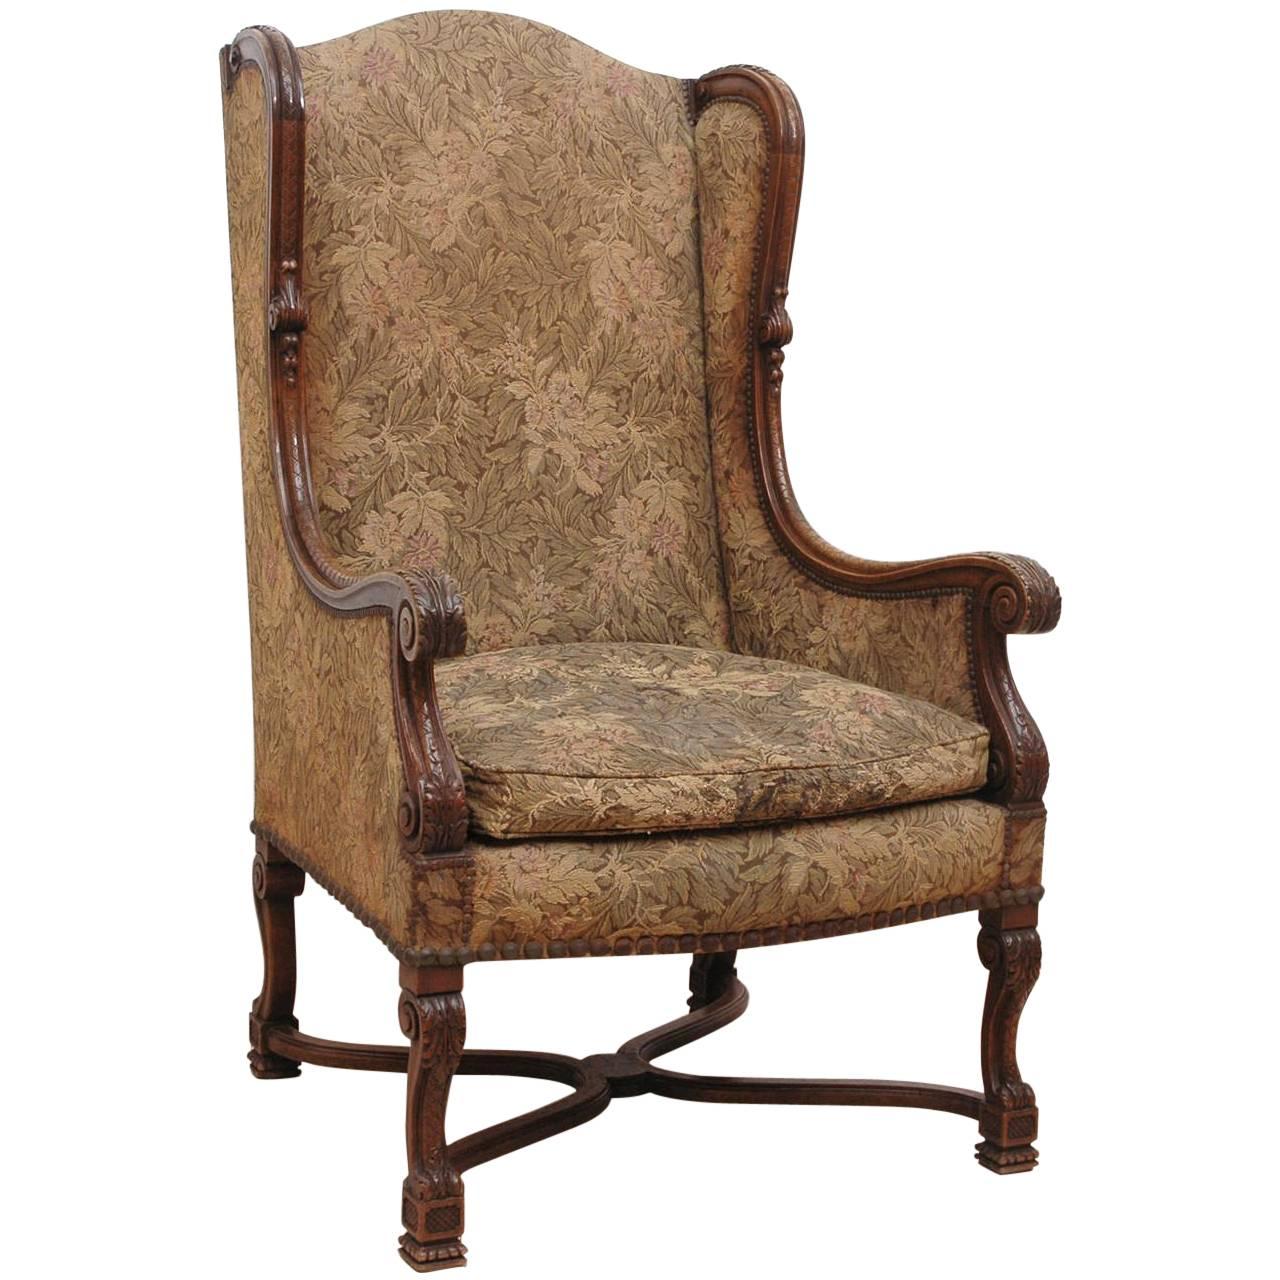 19th Century Neo-Renaissance Style Carved Wingback Chair with Upholstery For Sale